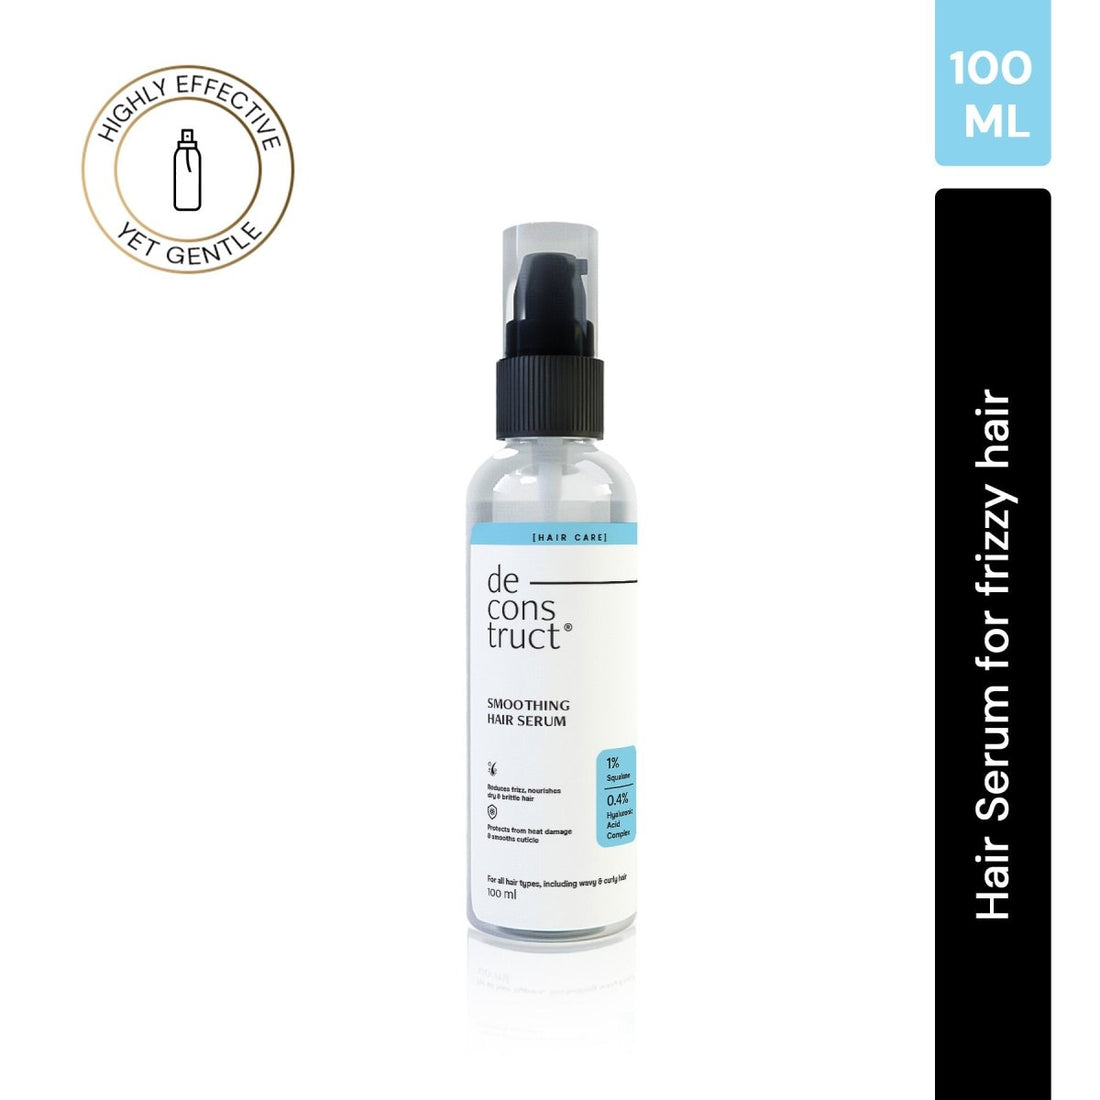 Smoothing Hair Serum - 1 % Squalane + 0.4 % Hyaluronic Acid Complex | Hair serum for Frizzy Hair - thedeconstruct